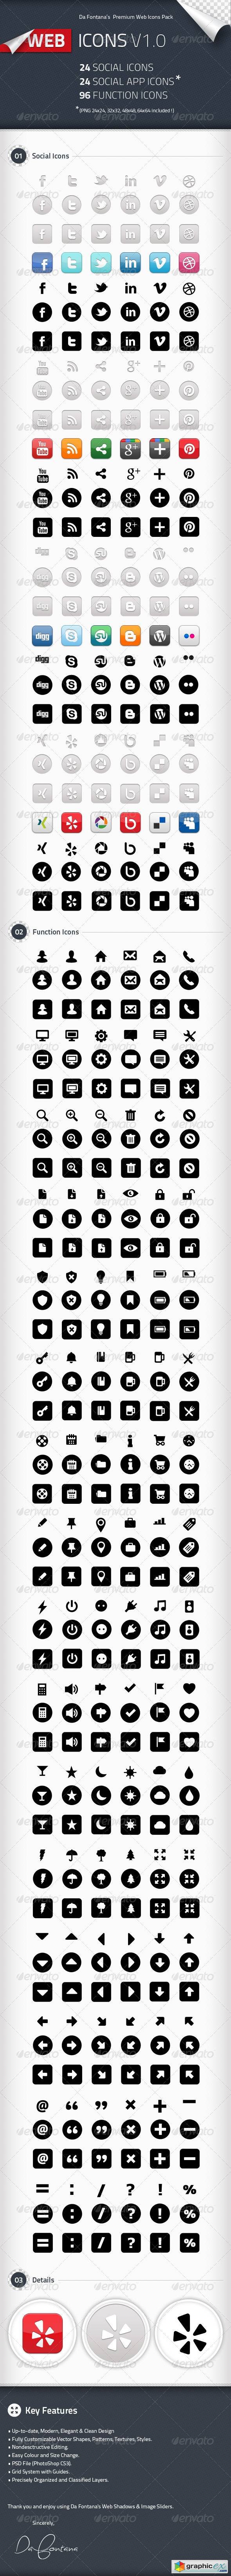 Social Icons, Social App Icons, Function Icons